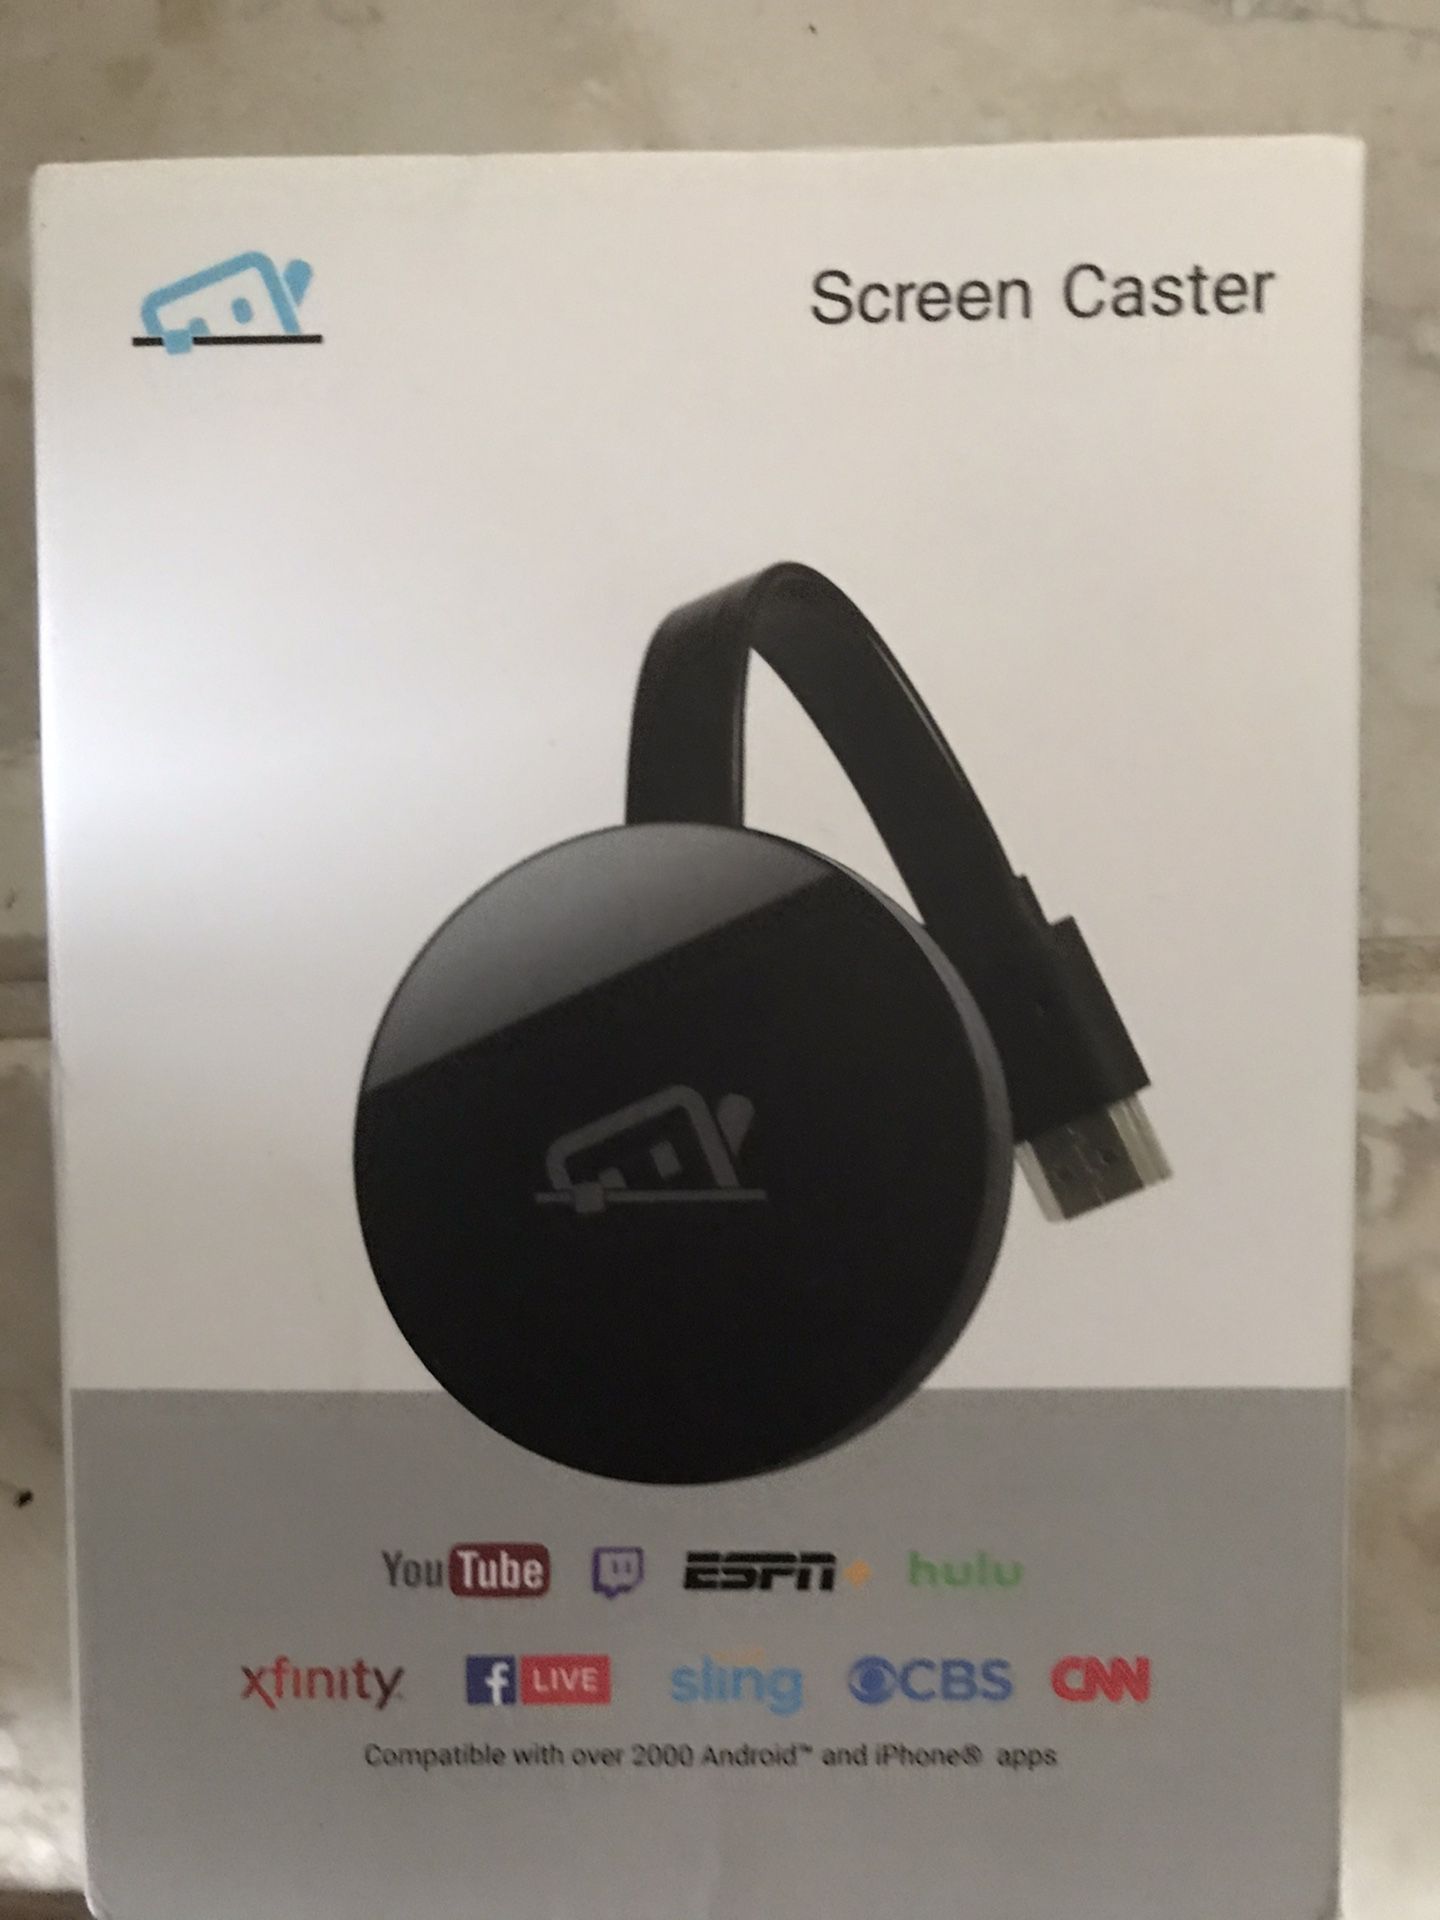 Screen caster new